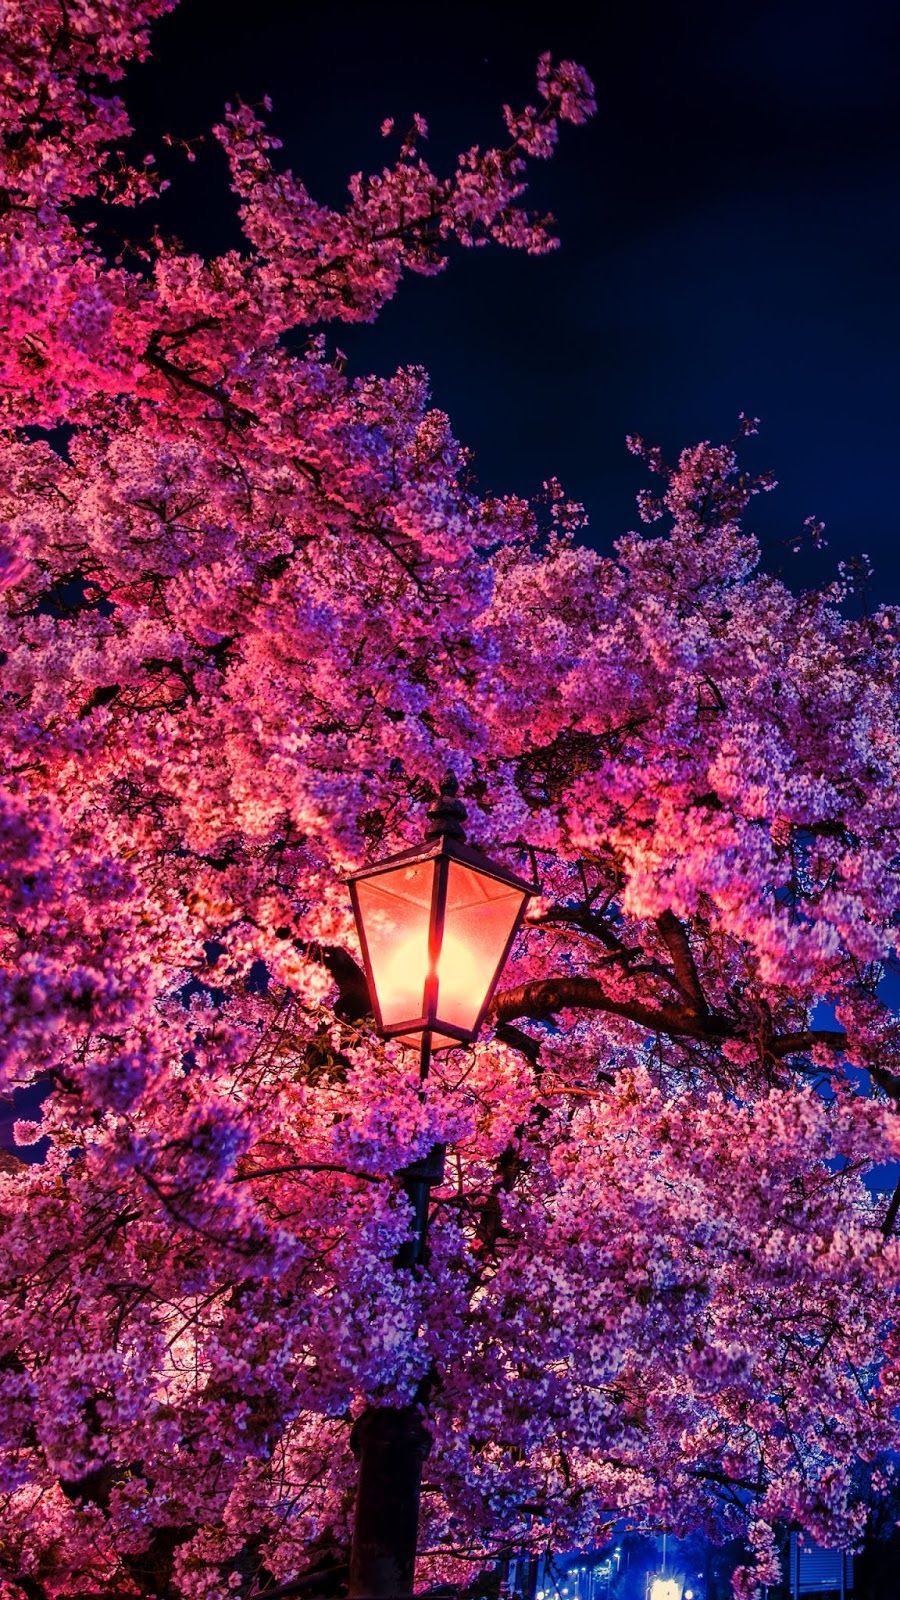 A night time street light with pink cherry blossoms in the foreground - Cherry blossom